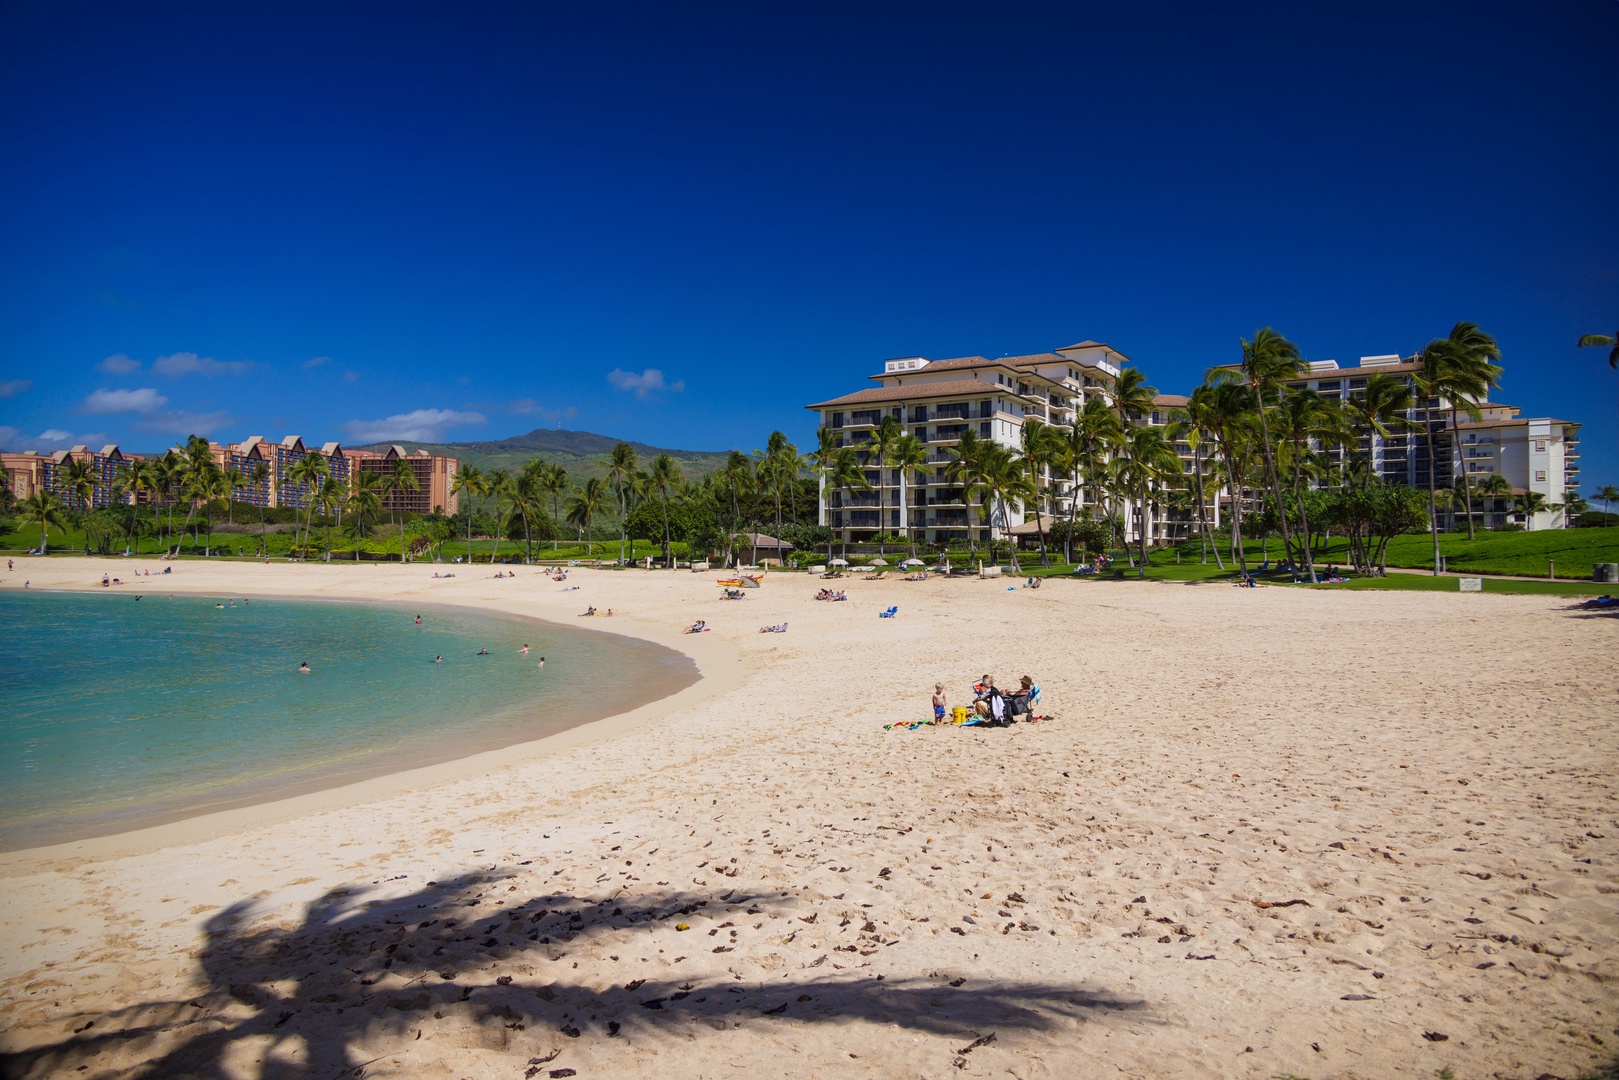 Kapolei Vacation Rentals, Ko Olina Kai 1033C - Ko Olina's private lagoons with soft sands and crystal blue water, perfect for afternoon swim or spectacular views.